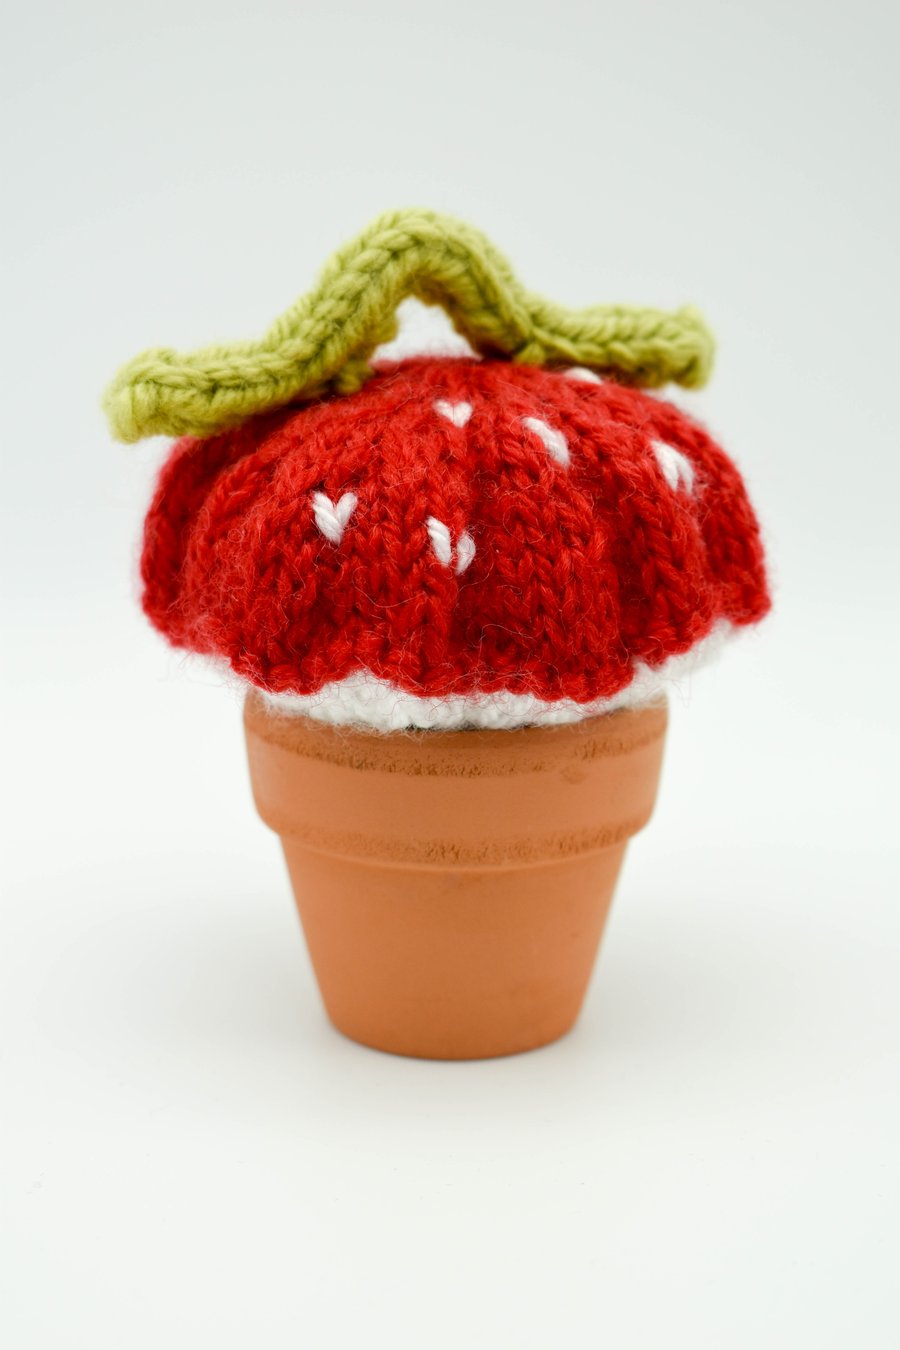 Hand knitted Toadstool and Caterpillar pincushion